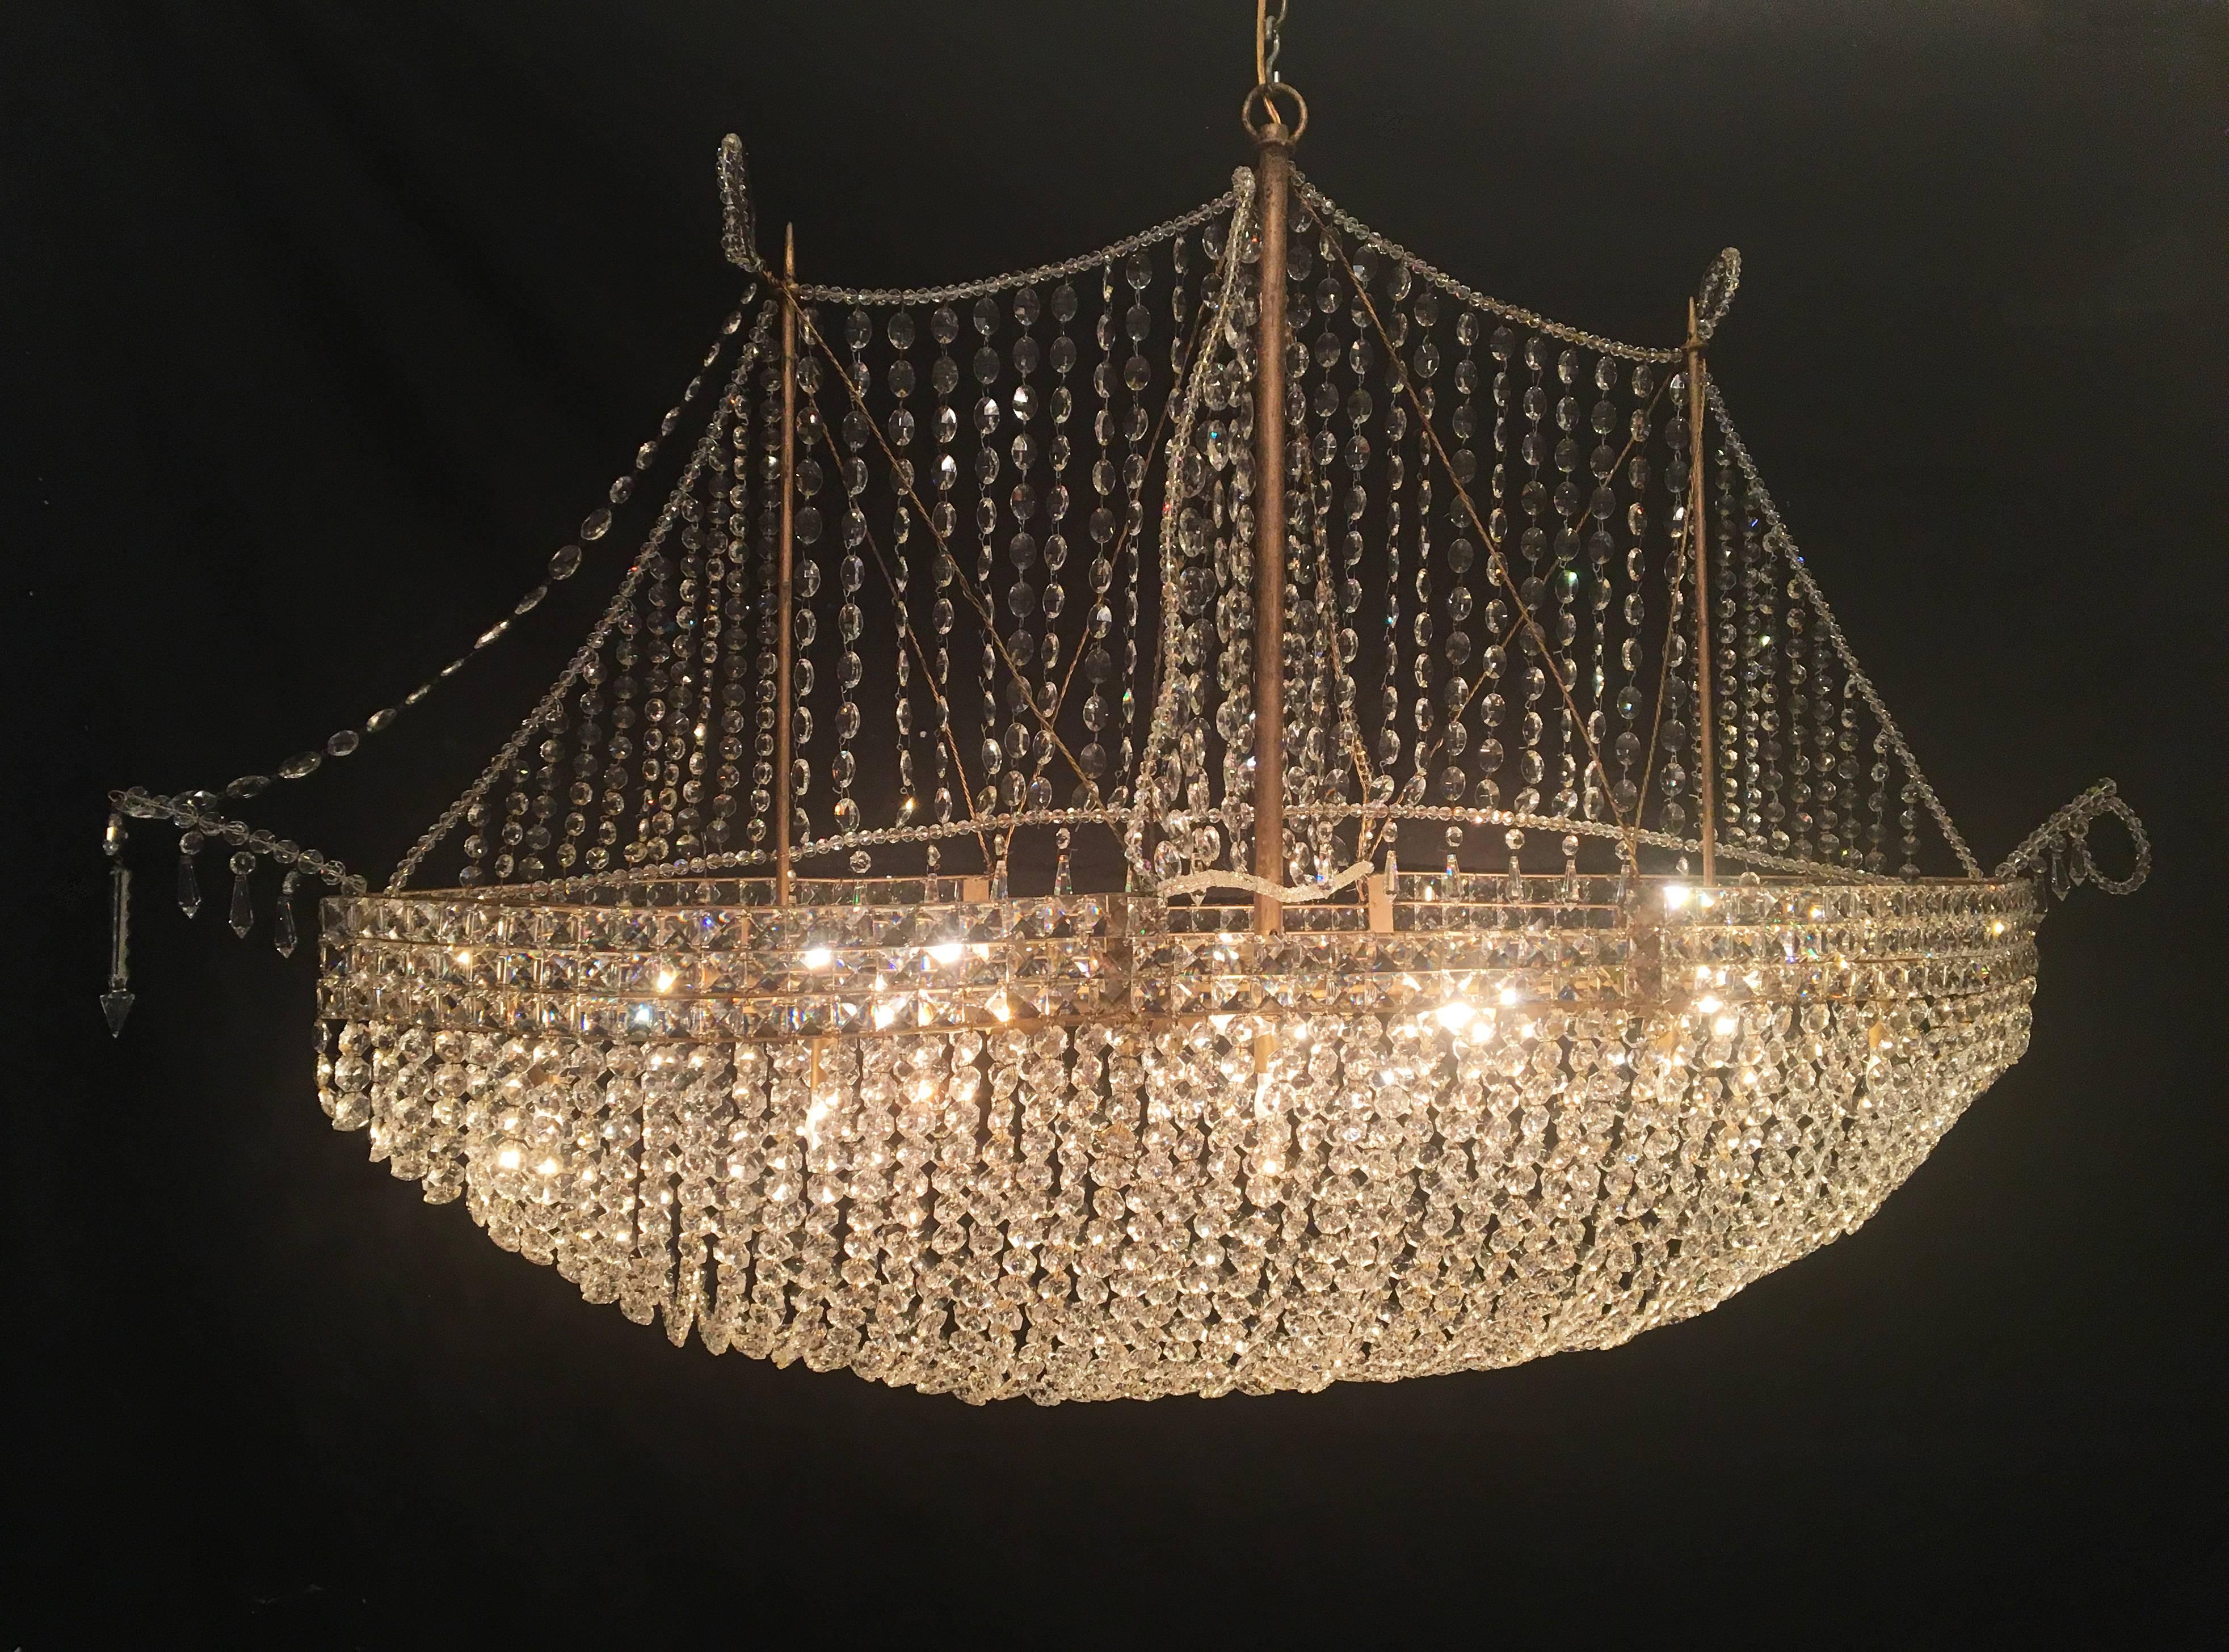 This stunning French crystal chandelier stretching 5 feet in length is sure to make a statement. The chandelier has recently been cleaned and rewired with porcelain sockets.